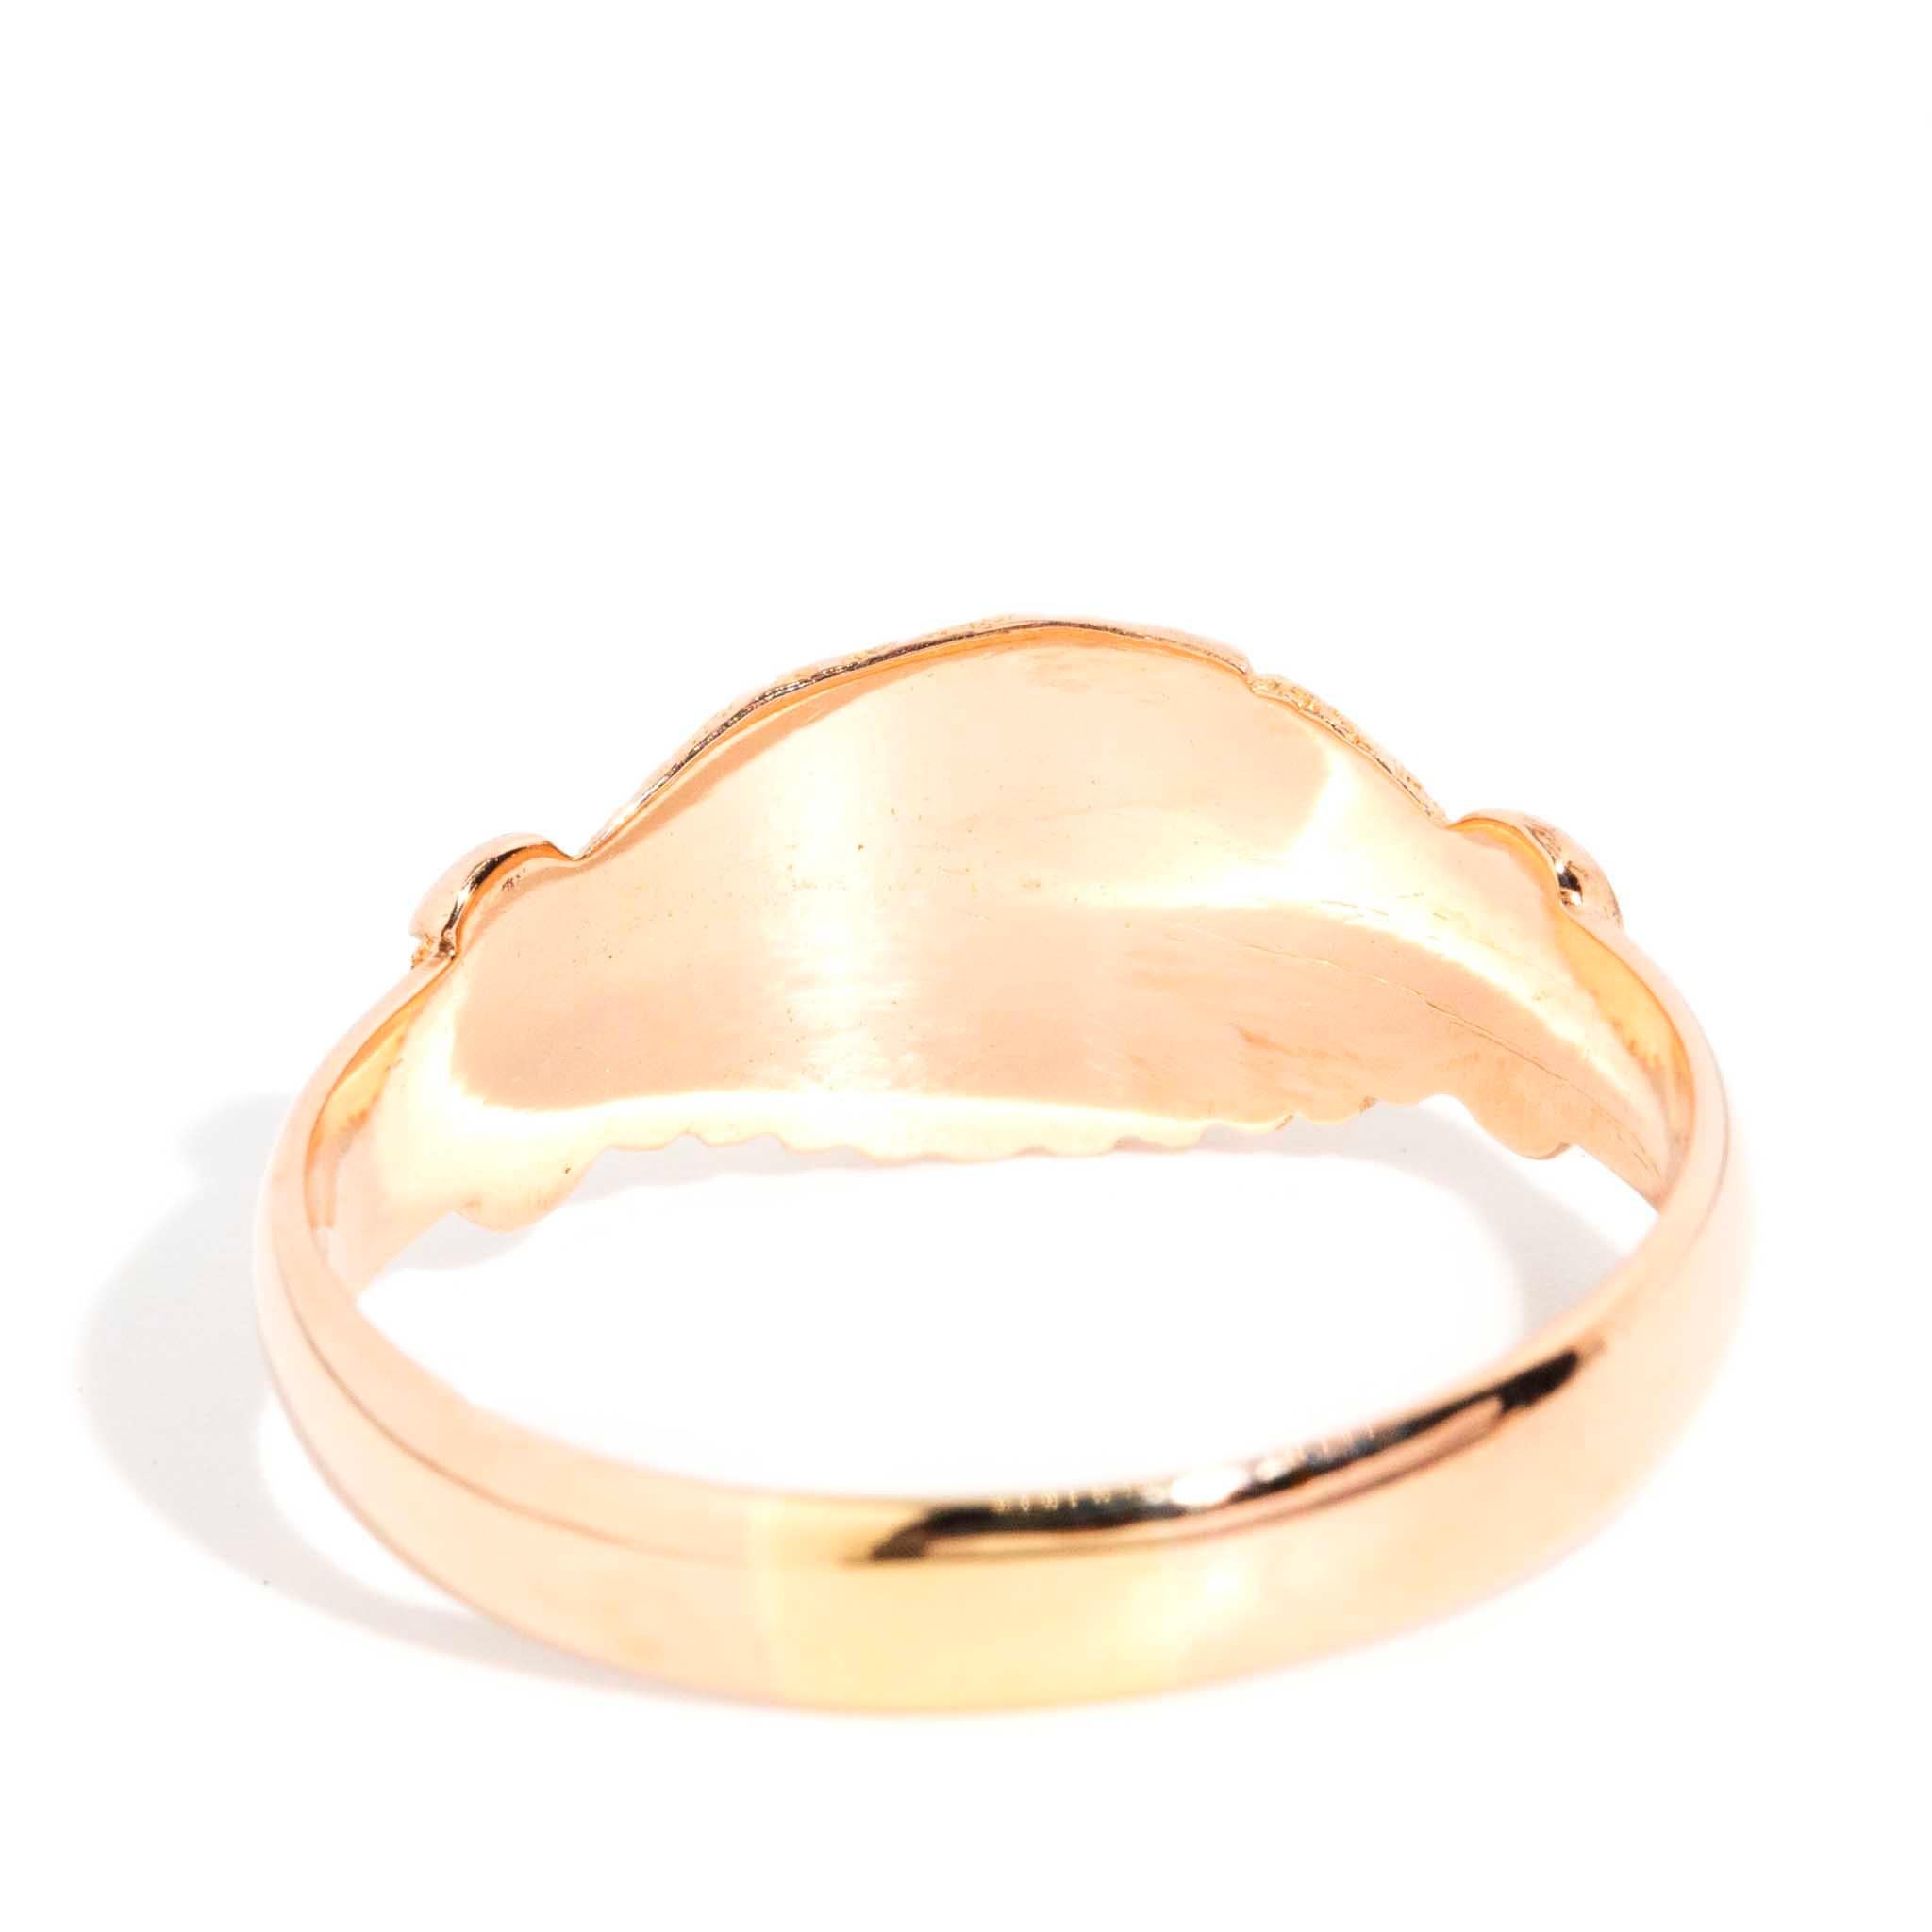 Vintage Circa 1930s Textured Fede Loyalty Ring 15 Carat Yellow Gold For Sale 3